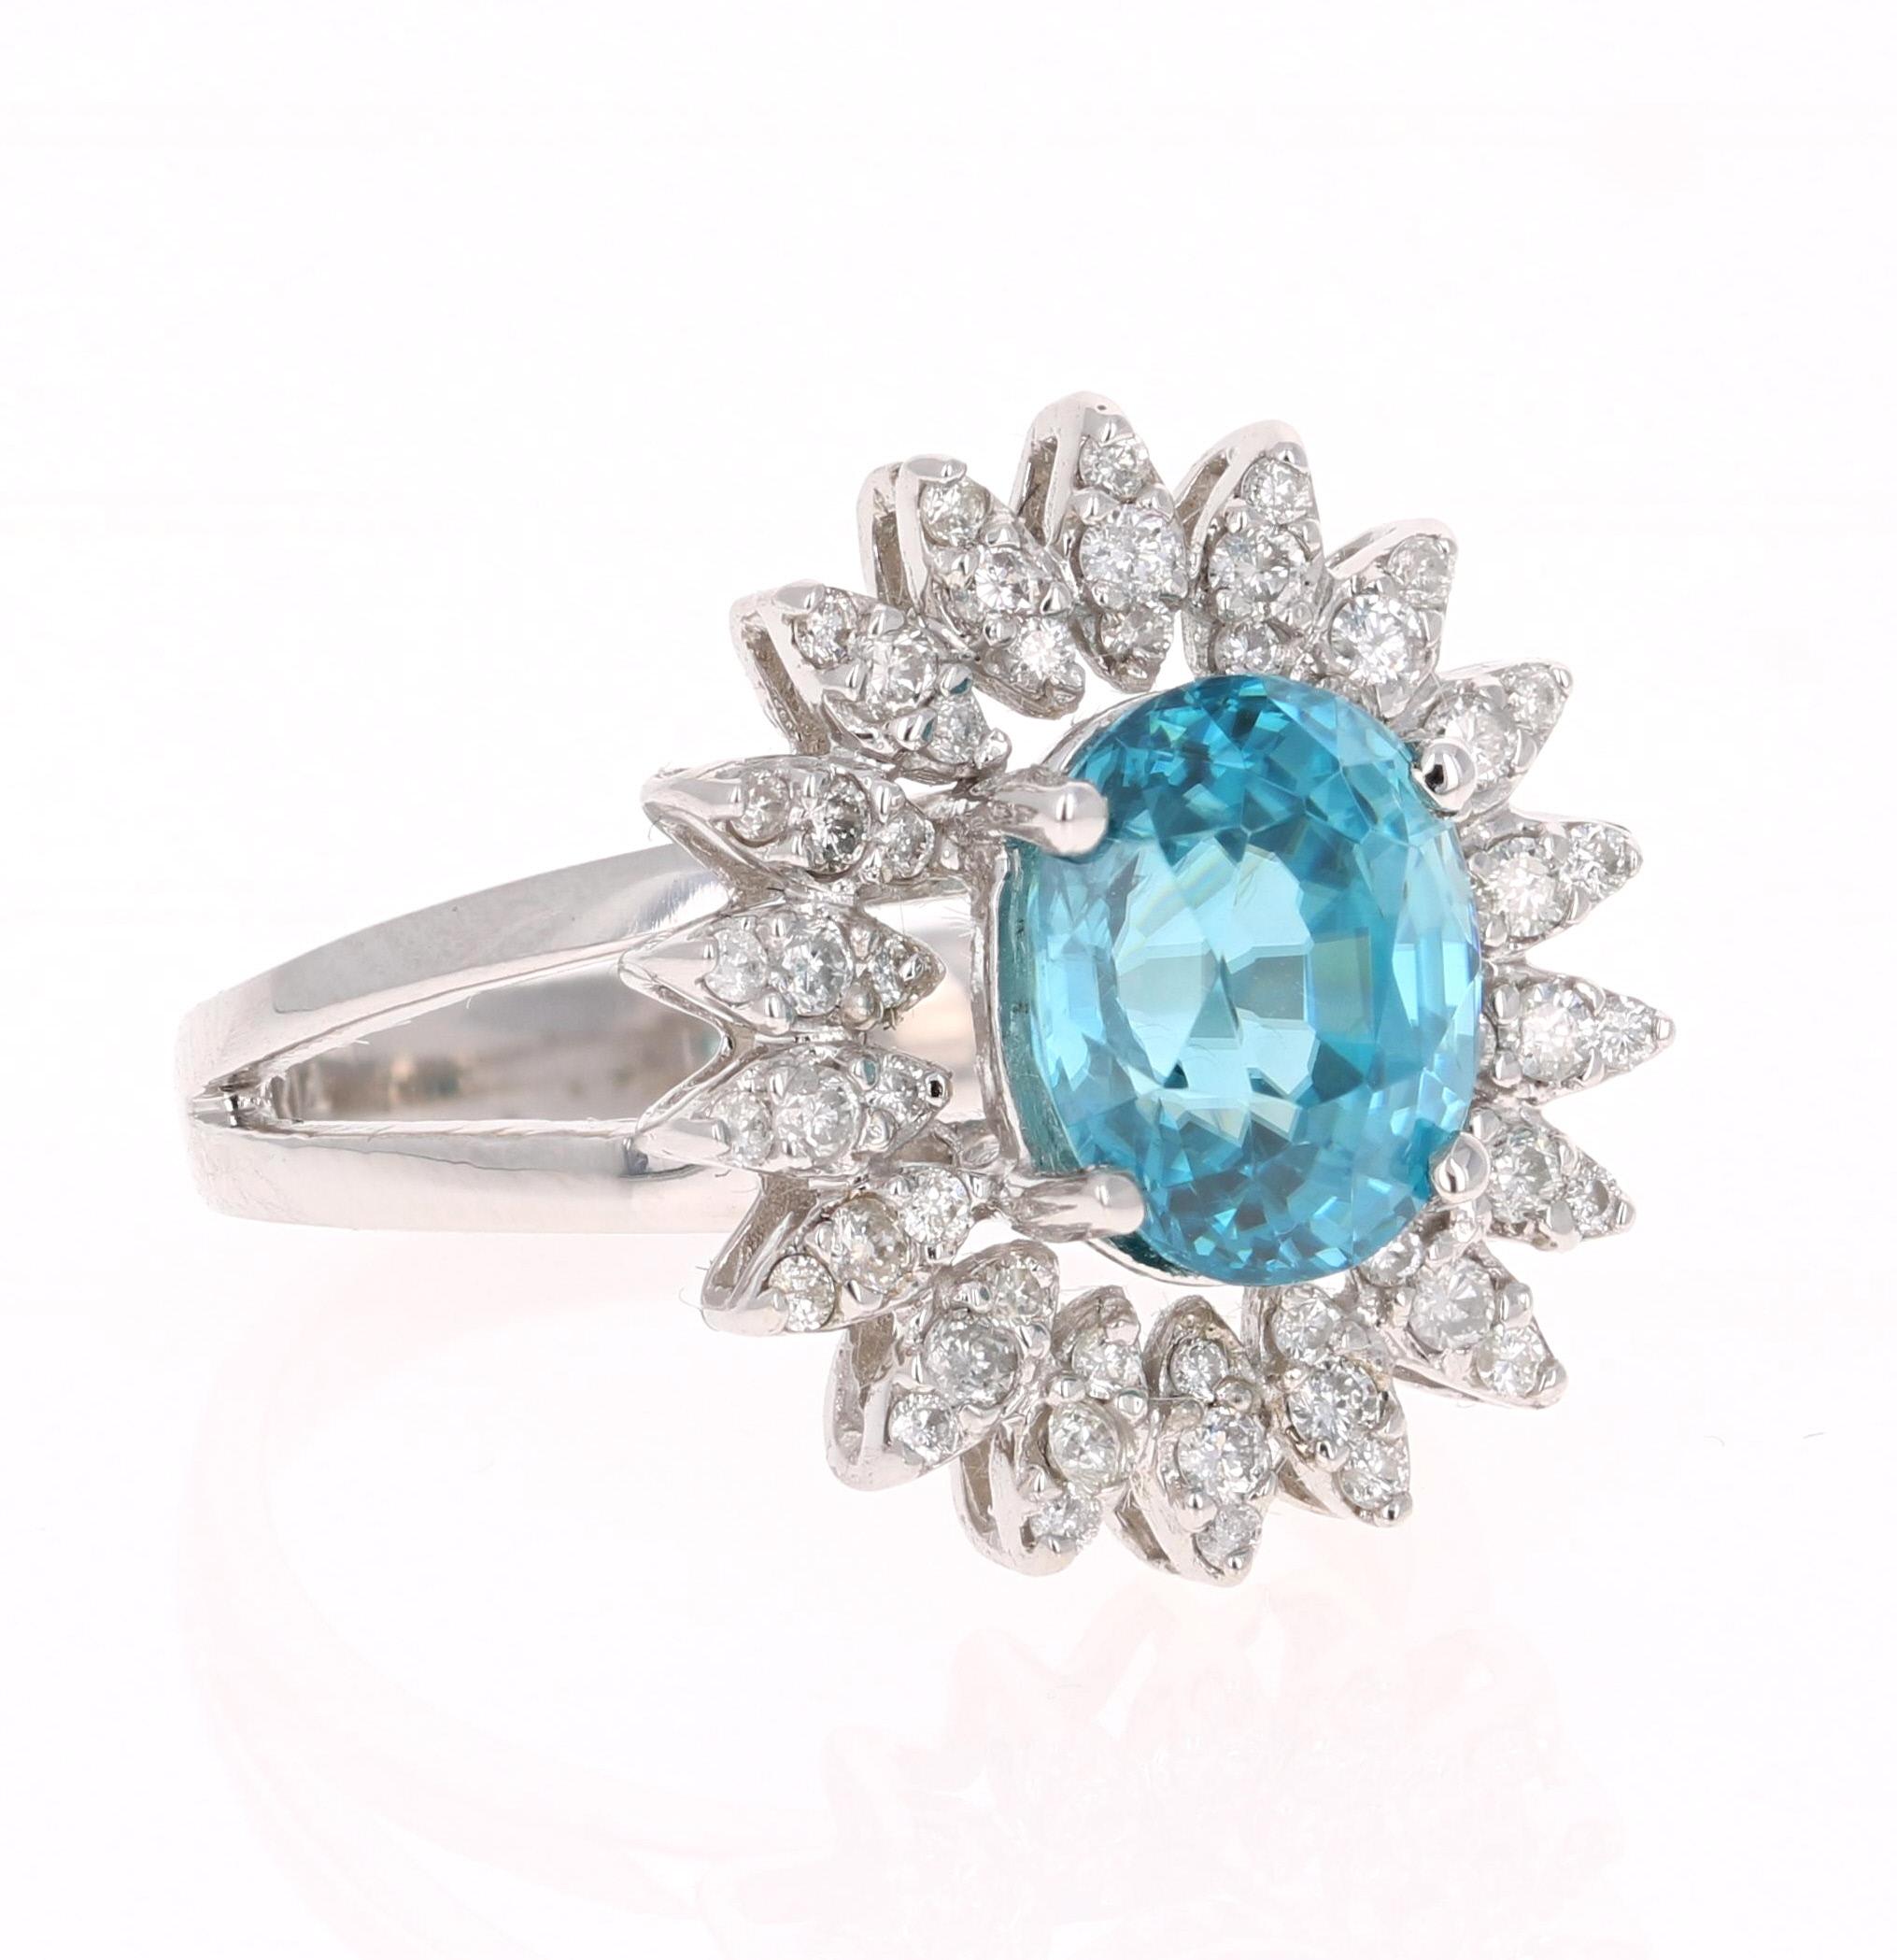 A Dazzling Blue Zircon and Diamond Ring! Blue Zircon is a natural stone mined in different parts of the world, mainly Sri Lanka, Myanmar, and Australia. 

This Oval Cut Blue Zircon is 4.26 Carats and is surrounded by 54 Round Cut Diamonds that weigh